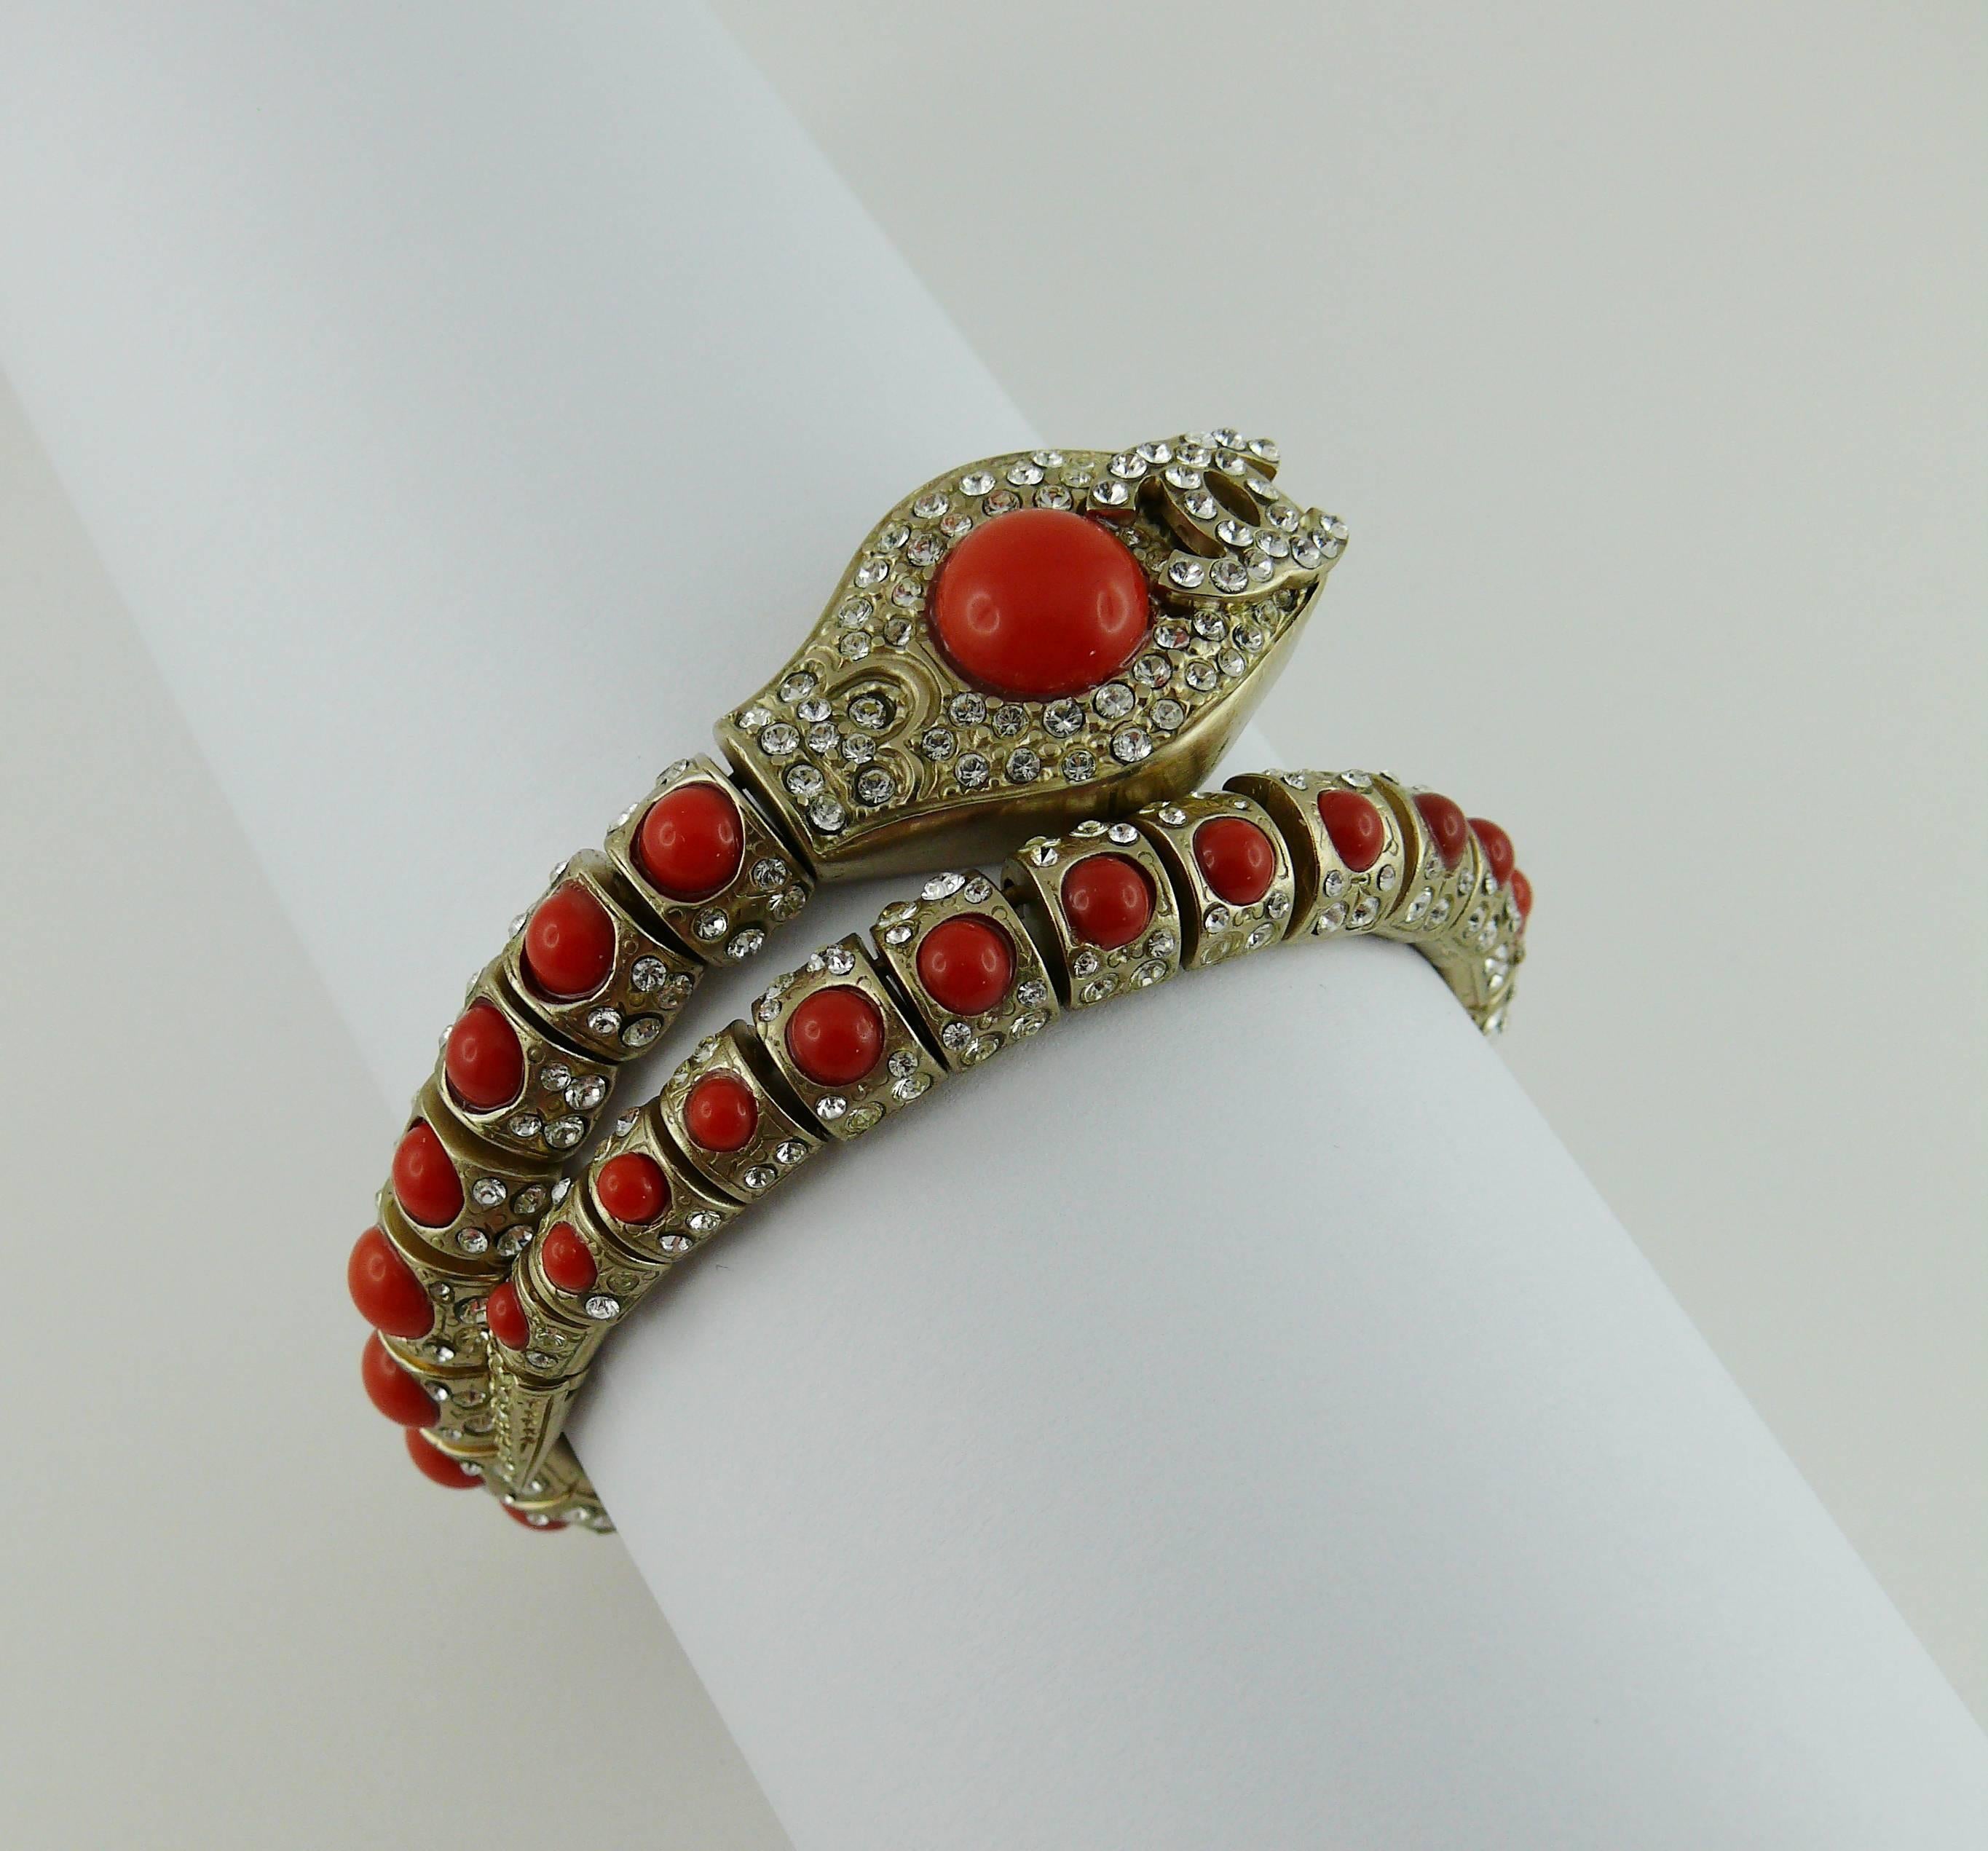 CHANEL gorgeous articulated snake bracelet featuring faux coral stones, clear crystals and interlocking CC logo.

Brushed metal with pale gilt.

Marked CHANEL 08 Made in Italy.

Indicative measurements : inner circumference unstretched approx. 17.29